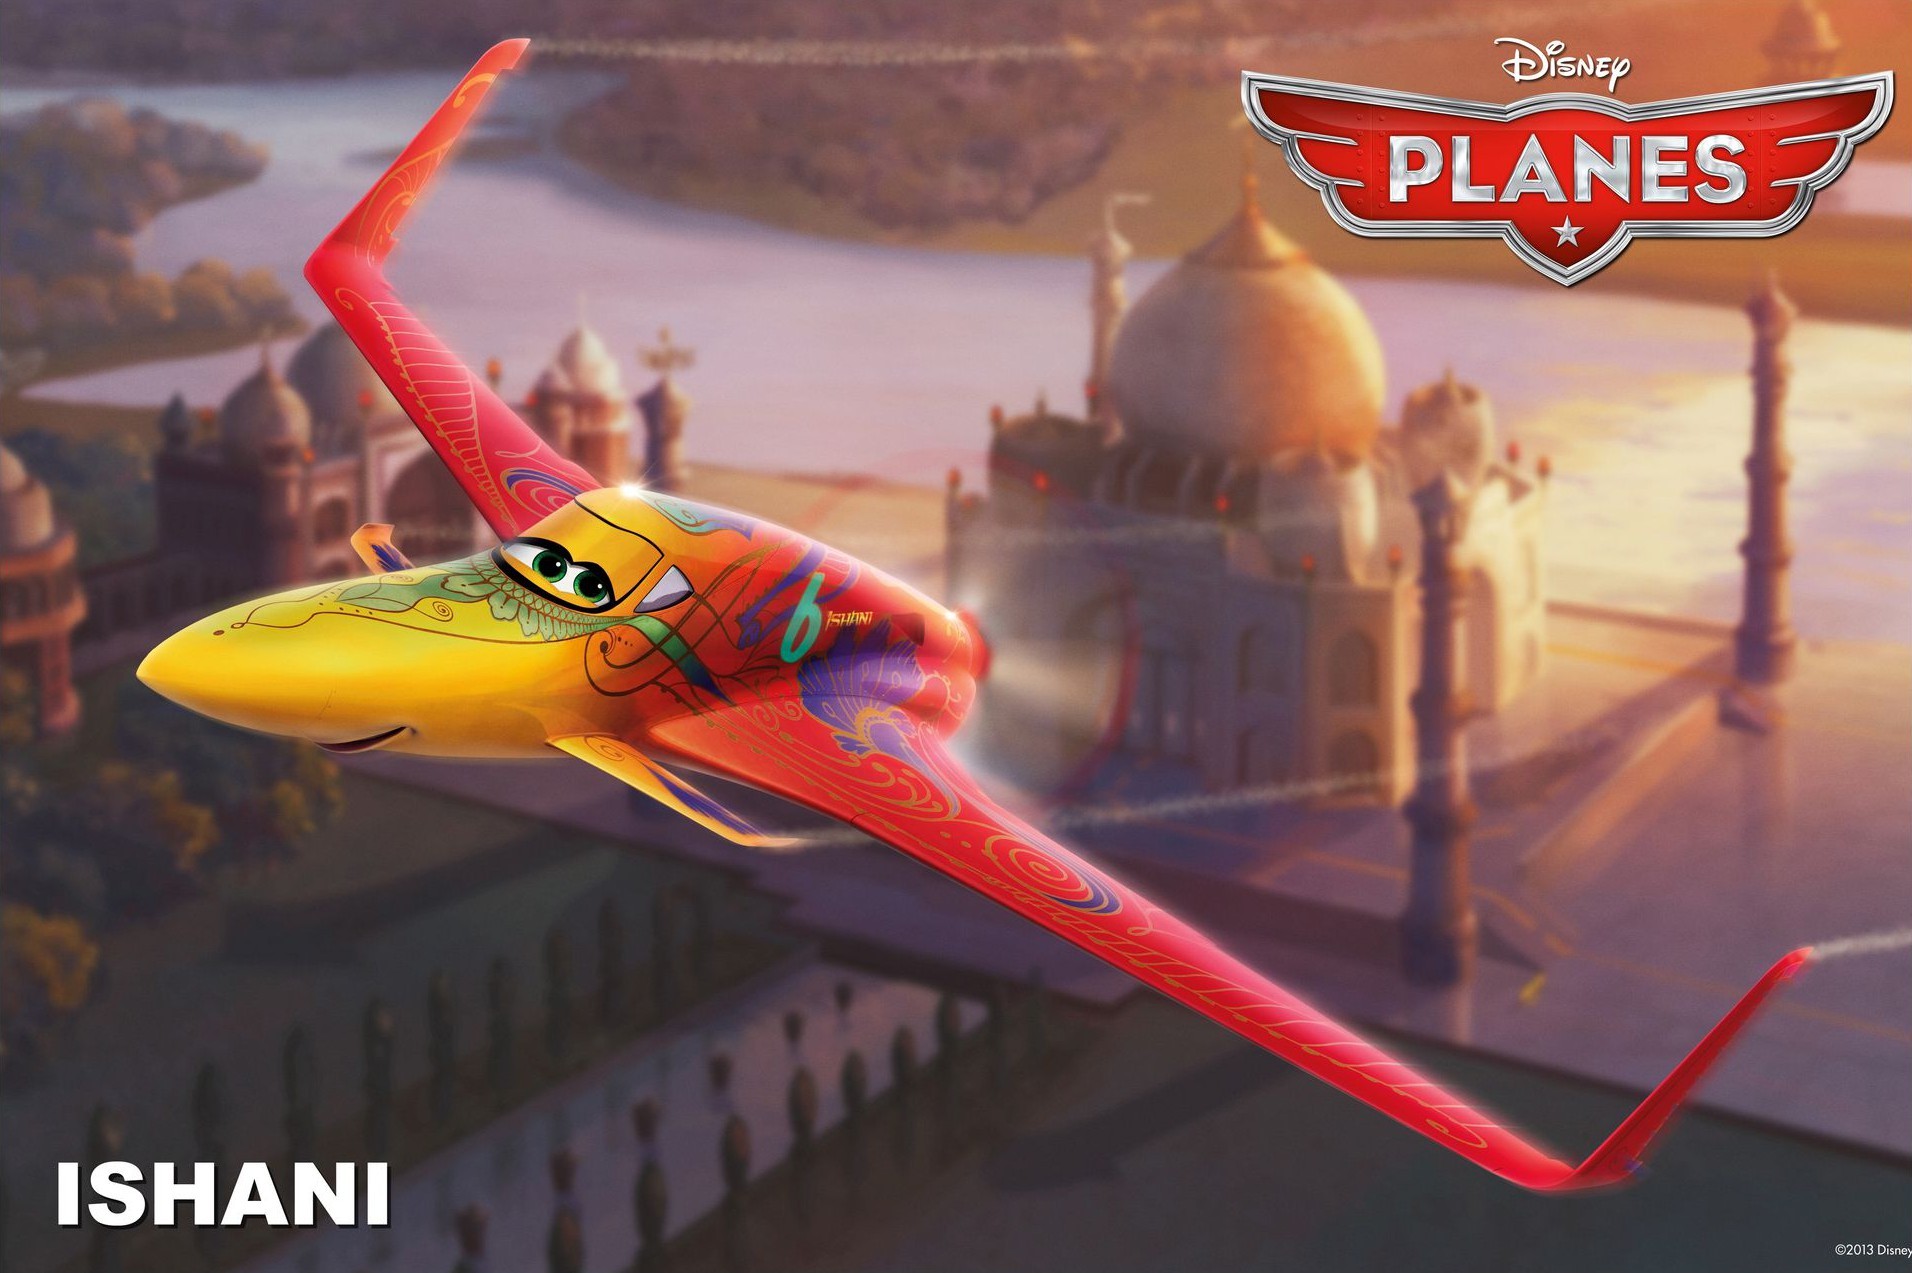 Ishani from Walt Disney Pictures' Planes (2013)